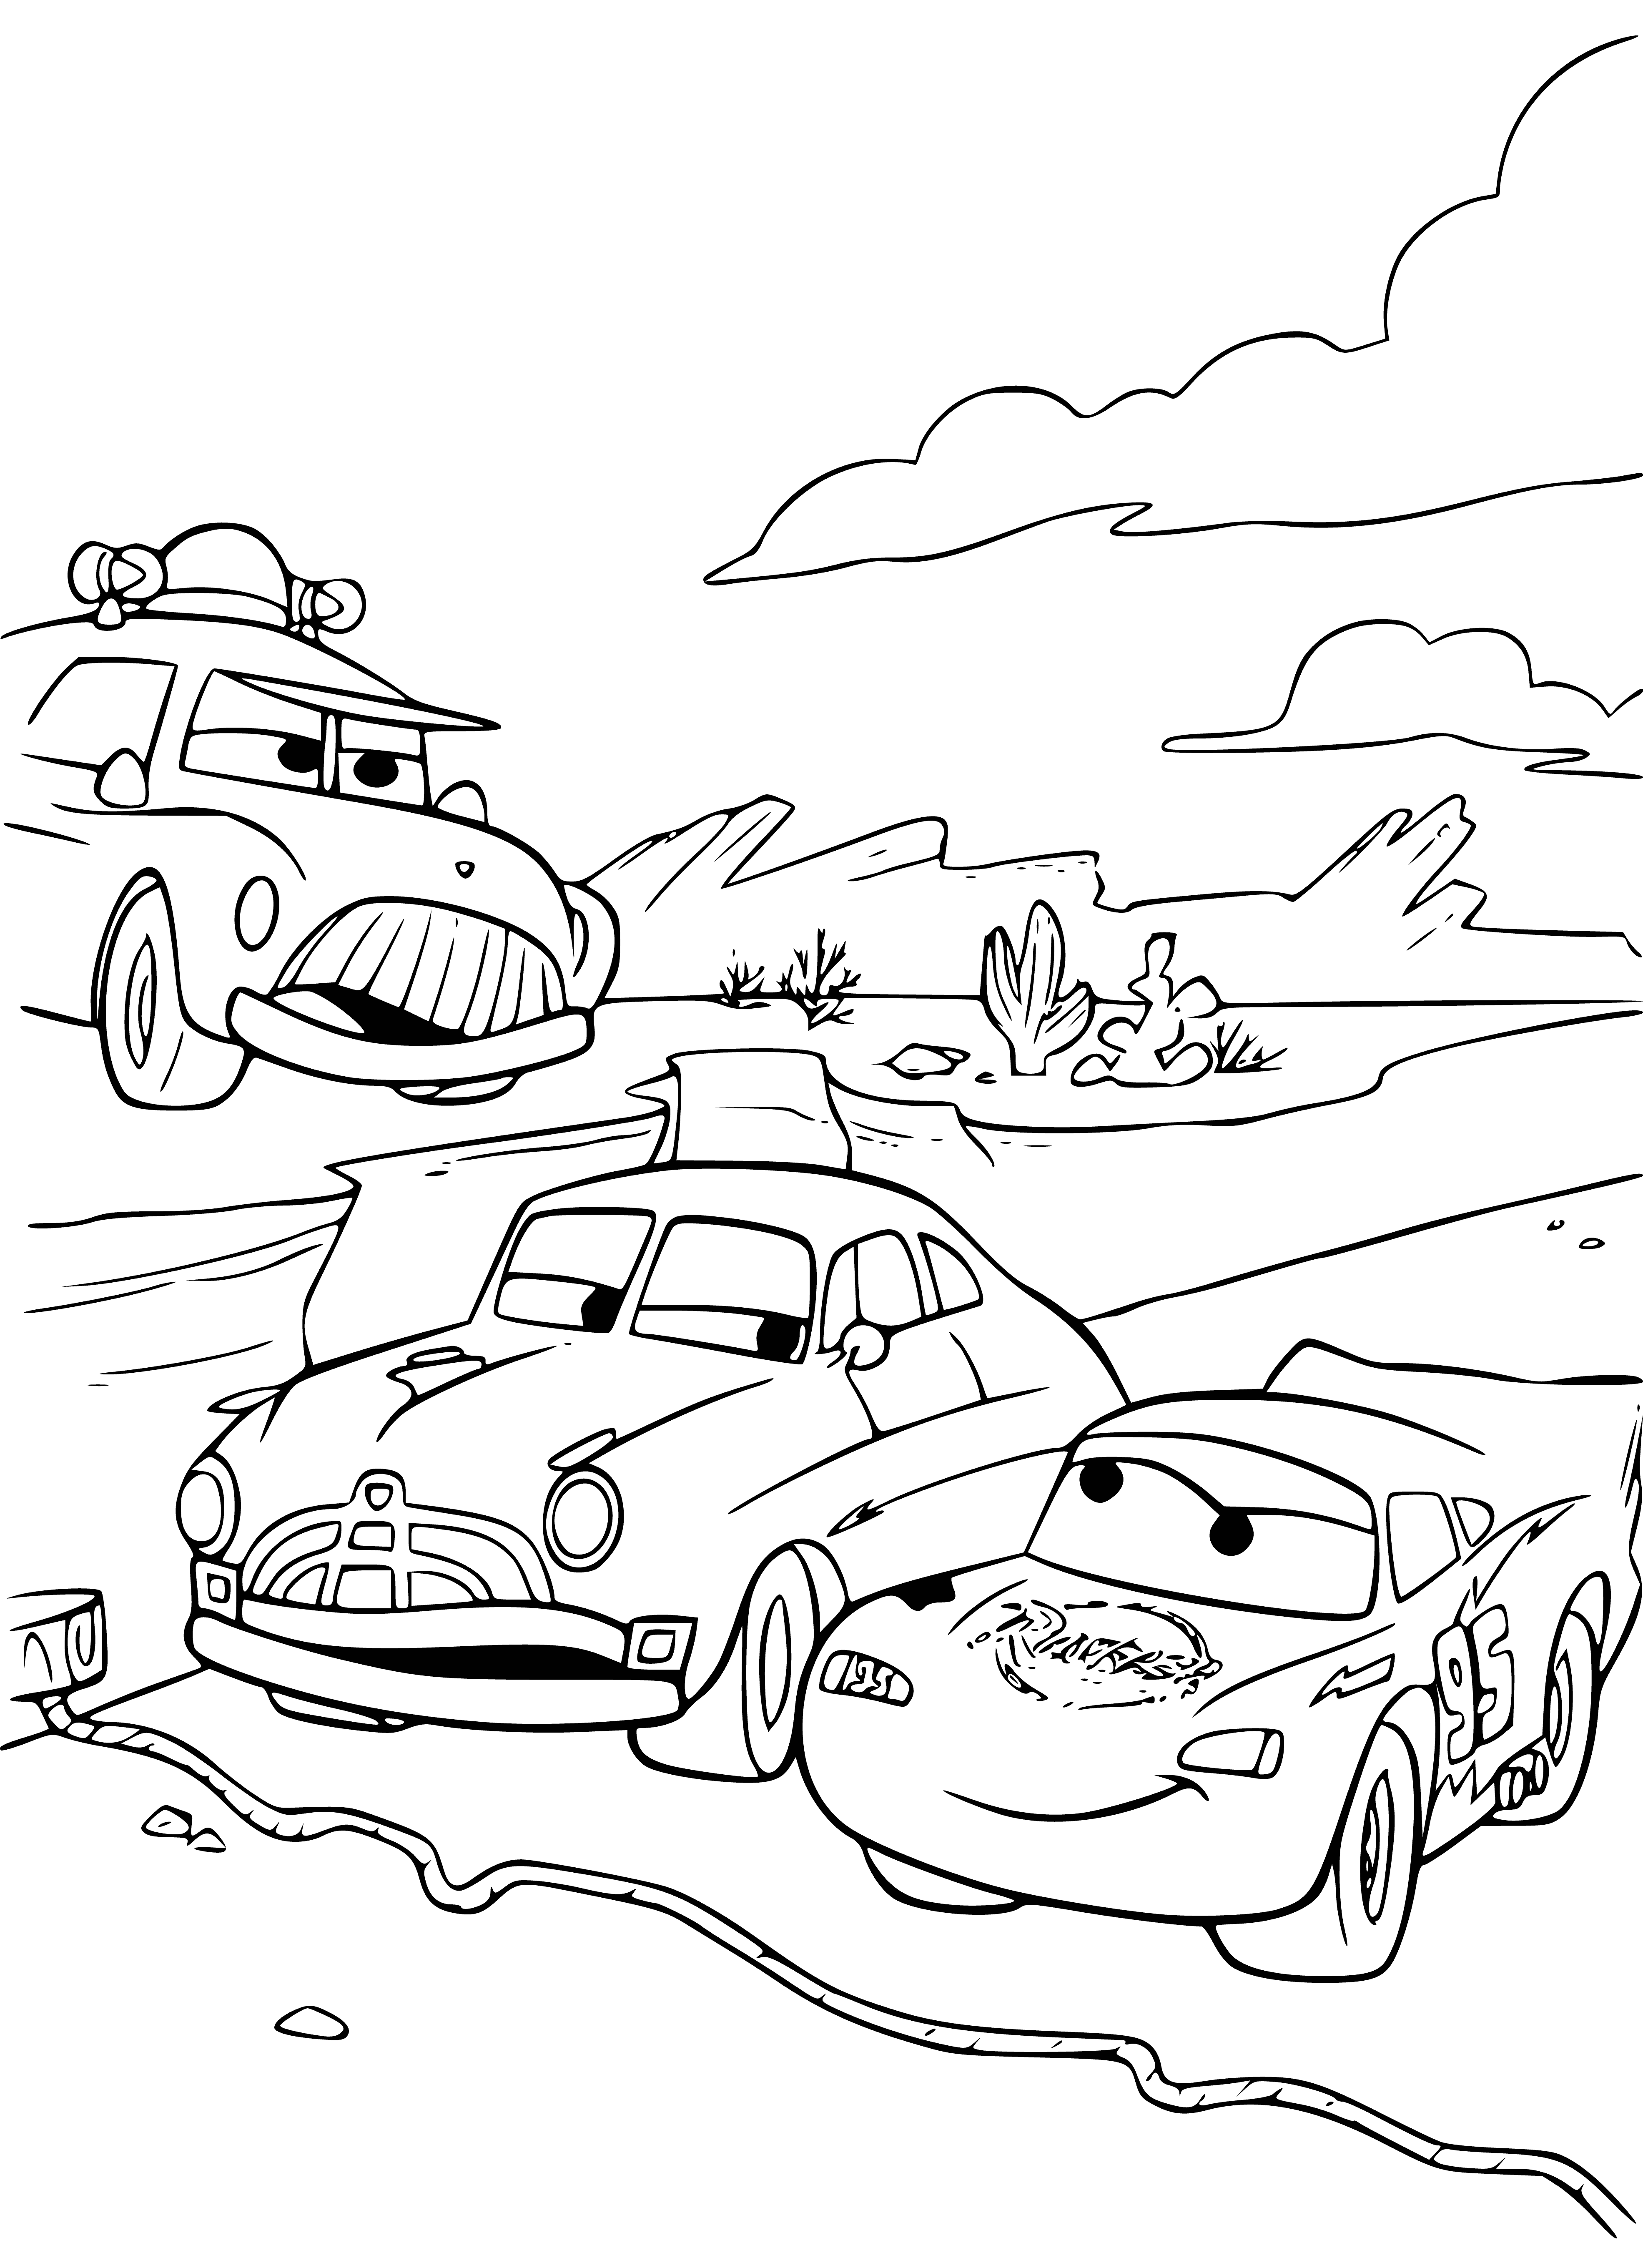 coloring page: Two cars in a barn, a red one with "Doc" written on it and a blue one with a white lightning bolt. #CarBarn